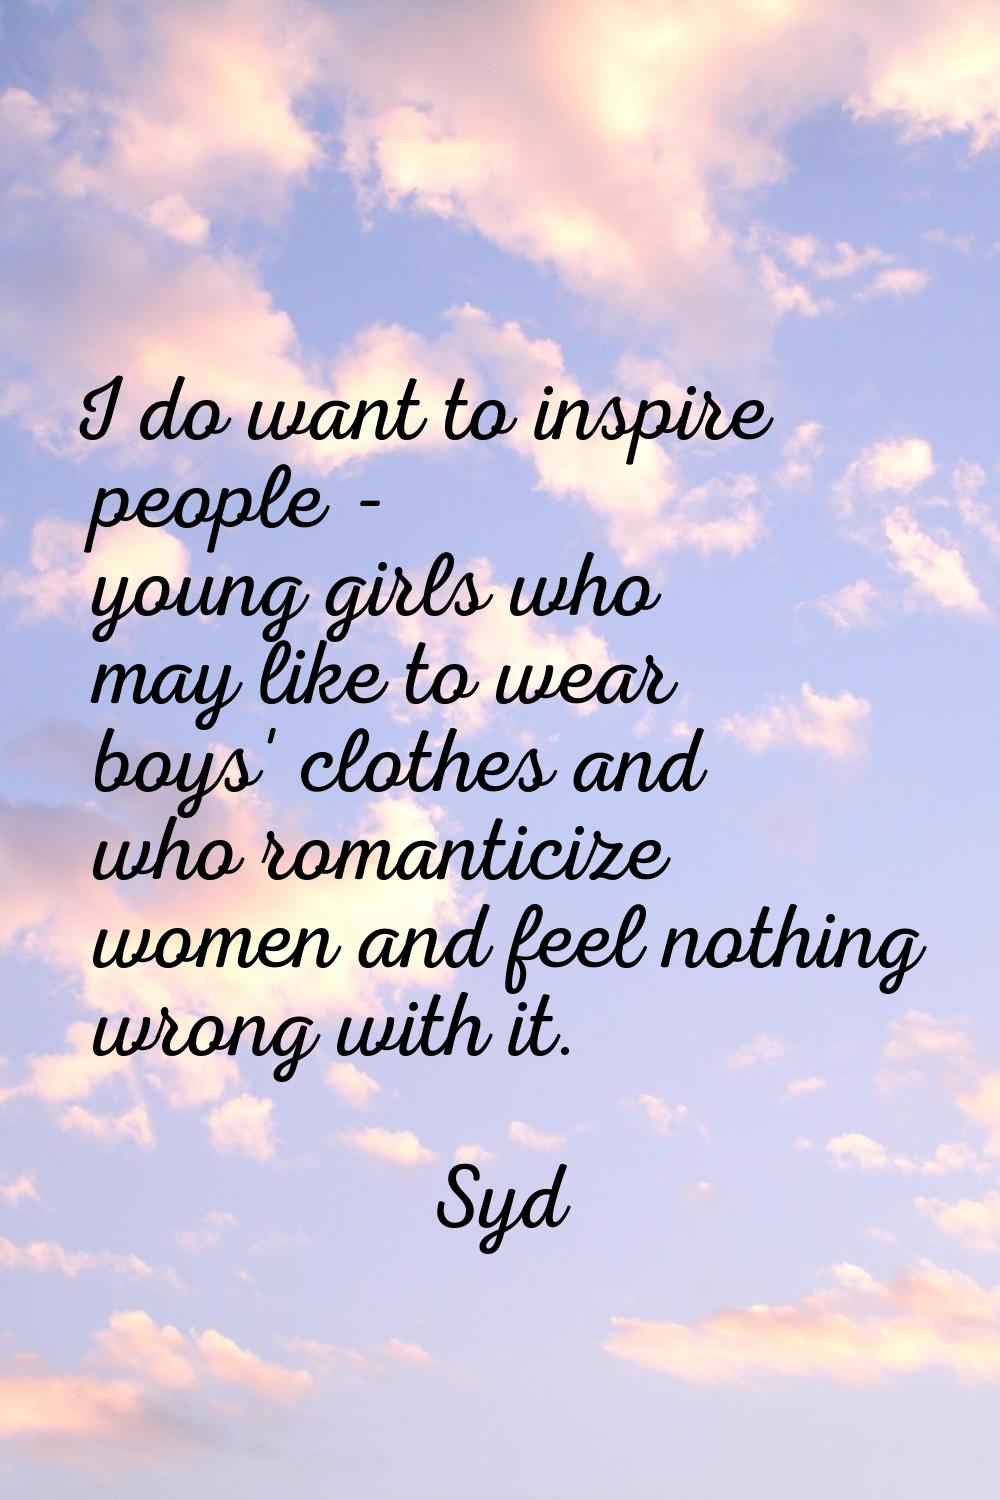 I do want to inspire people - young girls who may like to wear boys' clothes and who romanticize wo